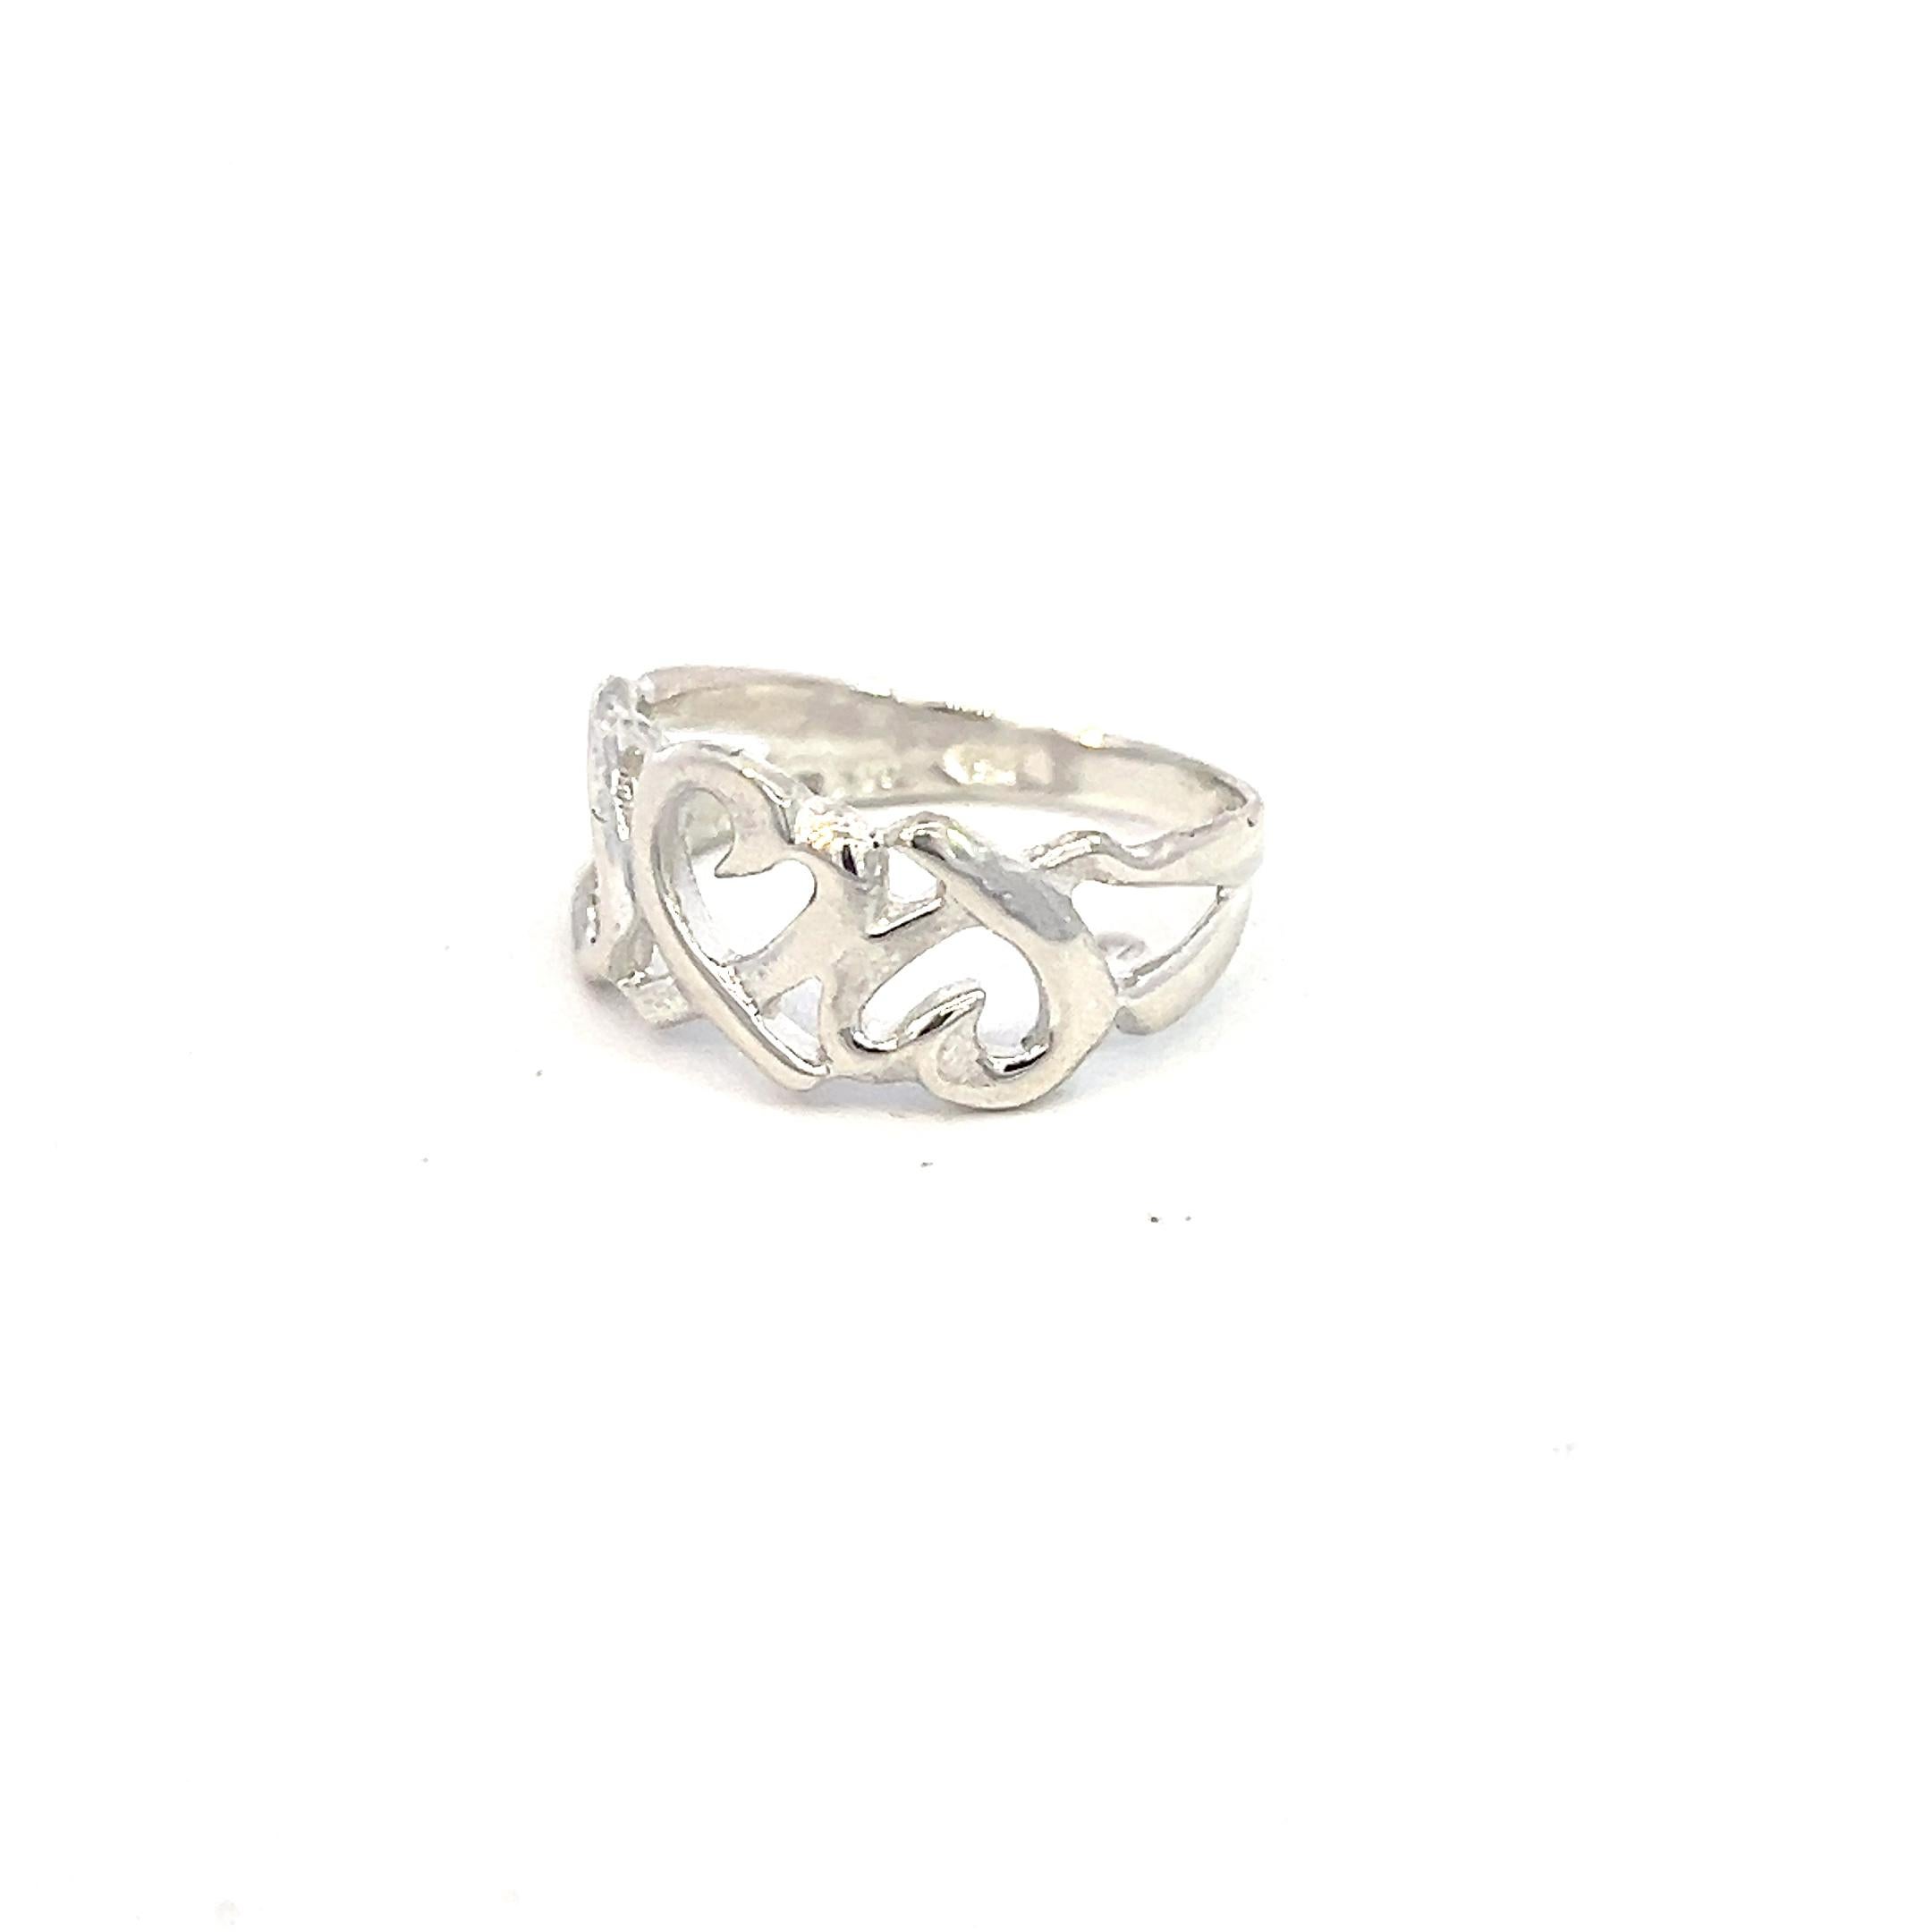 Tiffany & Co Estate Triple Heart Ring 4 Sterling Silver TIF641

TRUSTED SELLER SINCE 2002

DETAILS
Style: Triple Heart Ring
Ring Size: 4
Metal: Sterling Silver

We try to present our estate items as best as possible and most have been newly polished